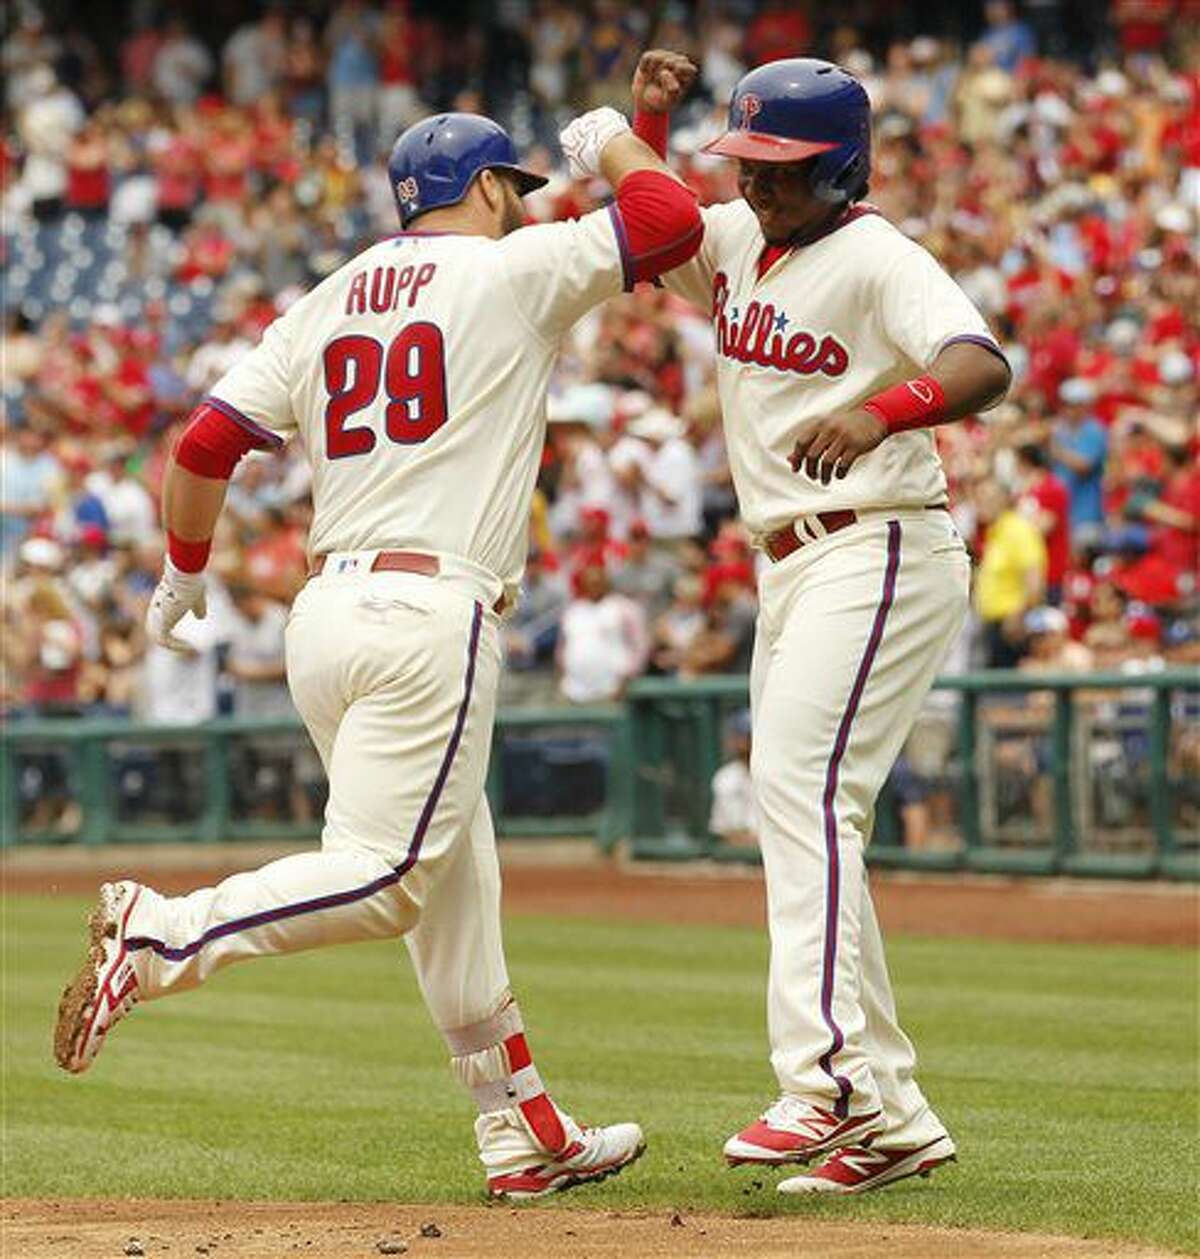 Philadelphia Phillies' Cameron Rupp, left, high-fives Maikel Franco after hitting a three-run home run during the first inning of a baseball game against the Kansas City Royals, Sunday, July 3, 2016, in Philadelphia. (AP Photo/Tom Mihalek)